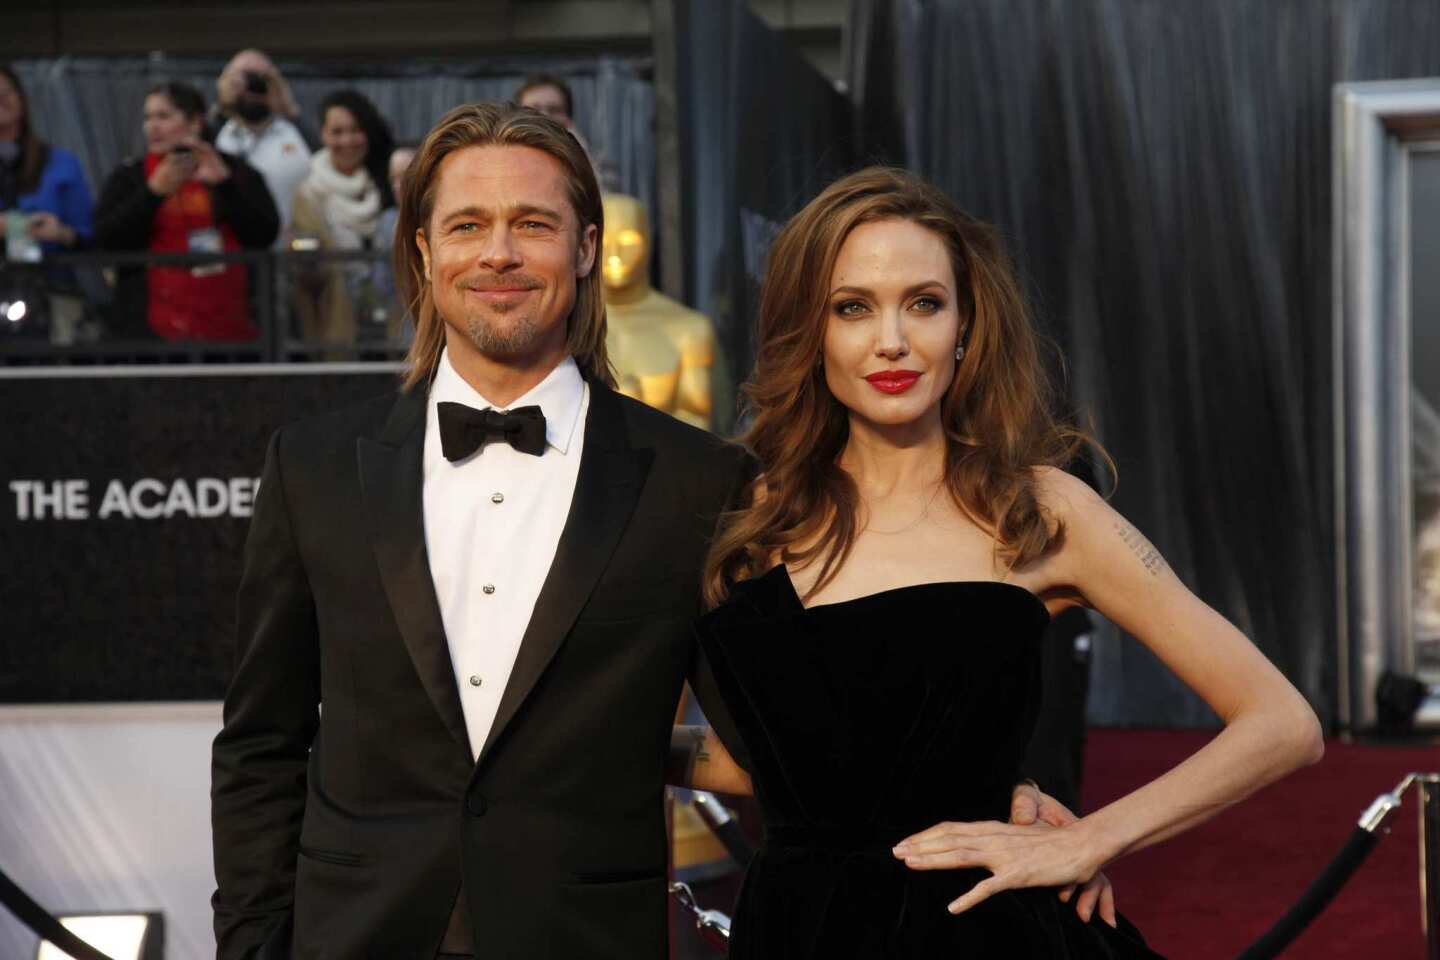 Brad Pitt, nominated for his role as Oakland Athletics General Manager Billy Beane in "Moneyball," said Hollywood could learn a thing or two from the film. "If you avoid the star system, you'll find equally talented people for a lot less money," said Pitt, pictured here with partner, actress Angelina Jolie, as he dashed by on the red carpet.